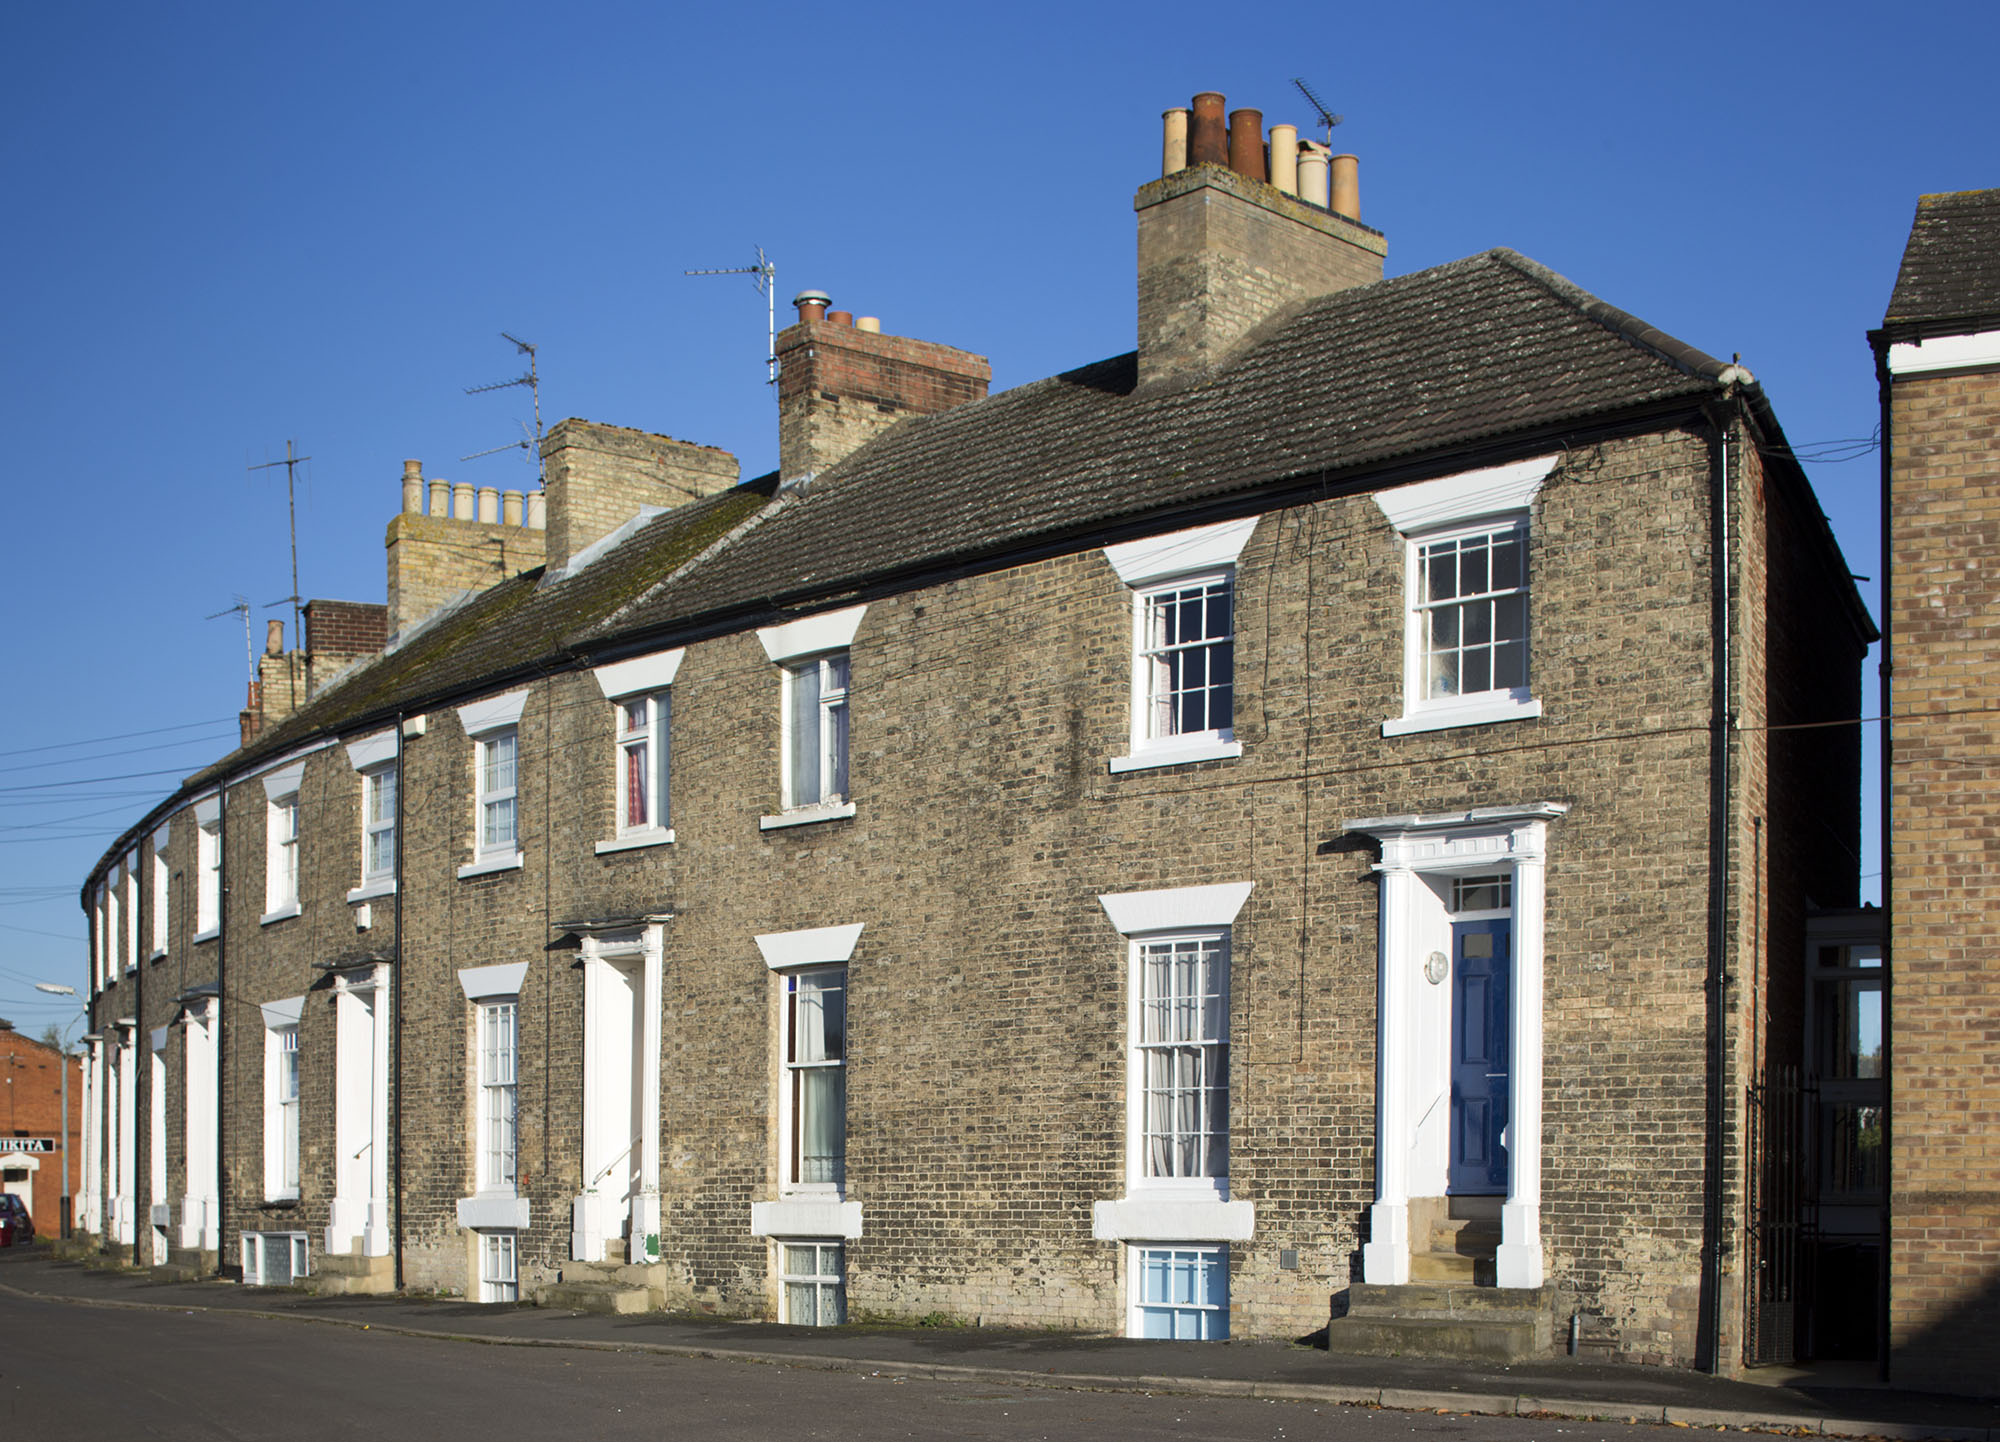 View of terraced housing which curves around a corner